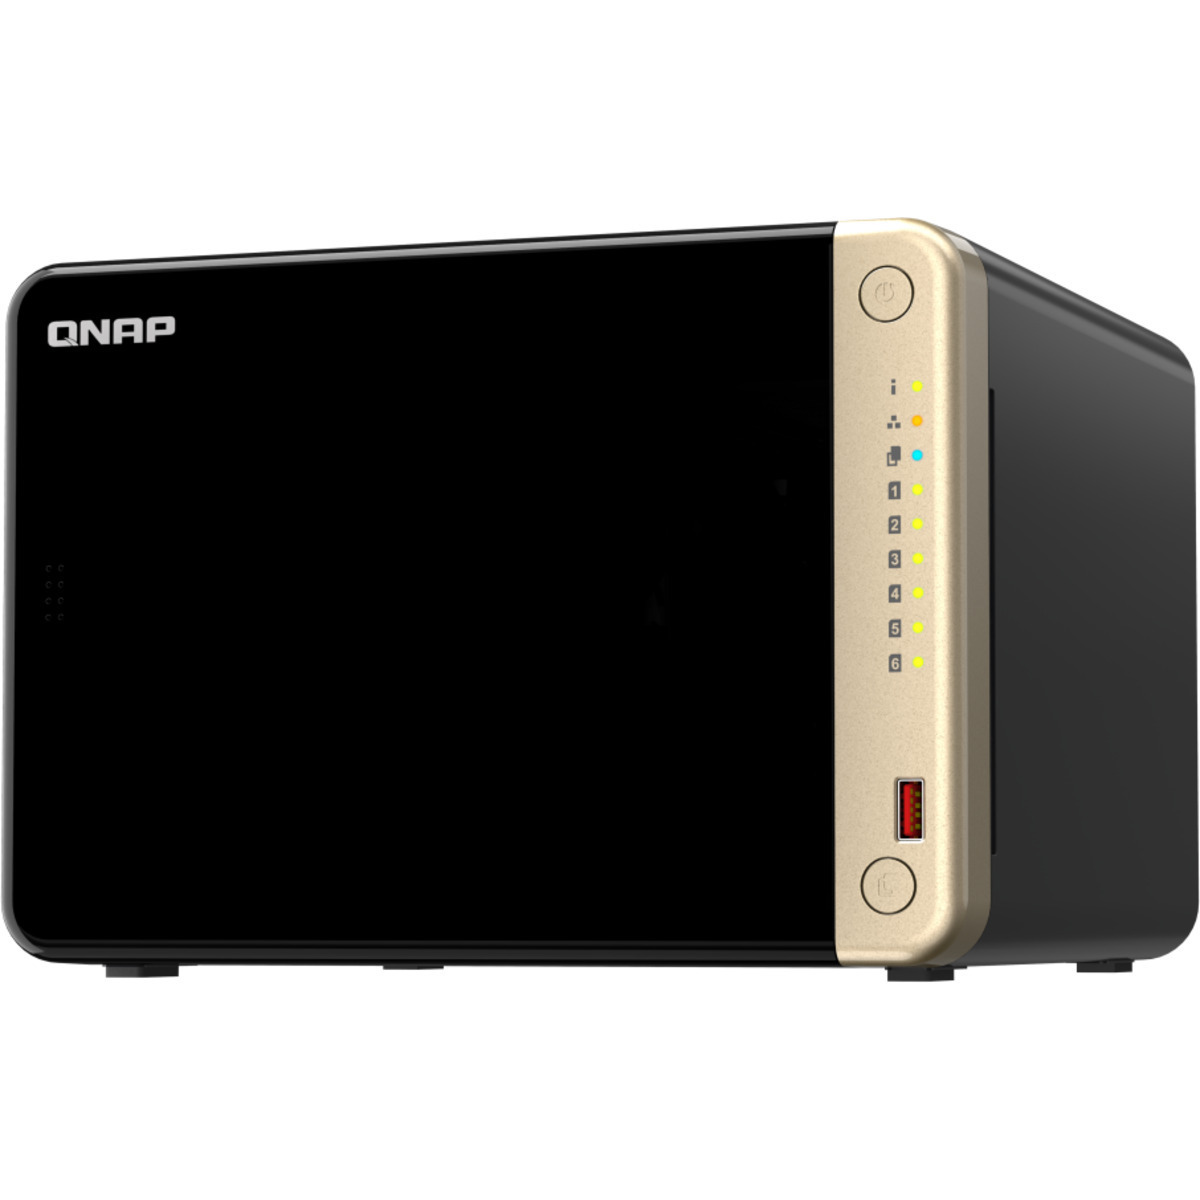 buy $2993 QNAP TS-664 120tb Desktop NAS - Network Attached Storage Device 6x20000gb Seagate EXOS X20 ST20000NM007D 3.5 7200rpm SATA 6Gb/s HDD ENTERPRISE Class Drives Installed - Burn-In Tested - FREE RAM UPGRADE - nas headquarters buy network attached storage server device das new raid-5 free shipping usa TS-664